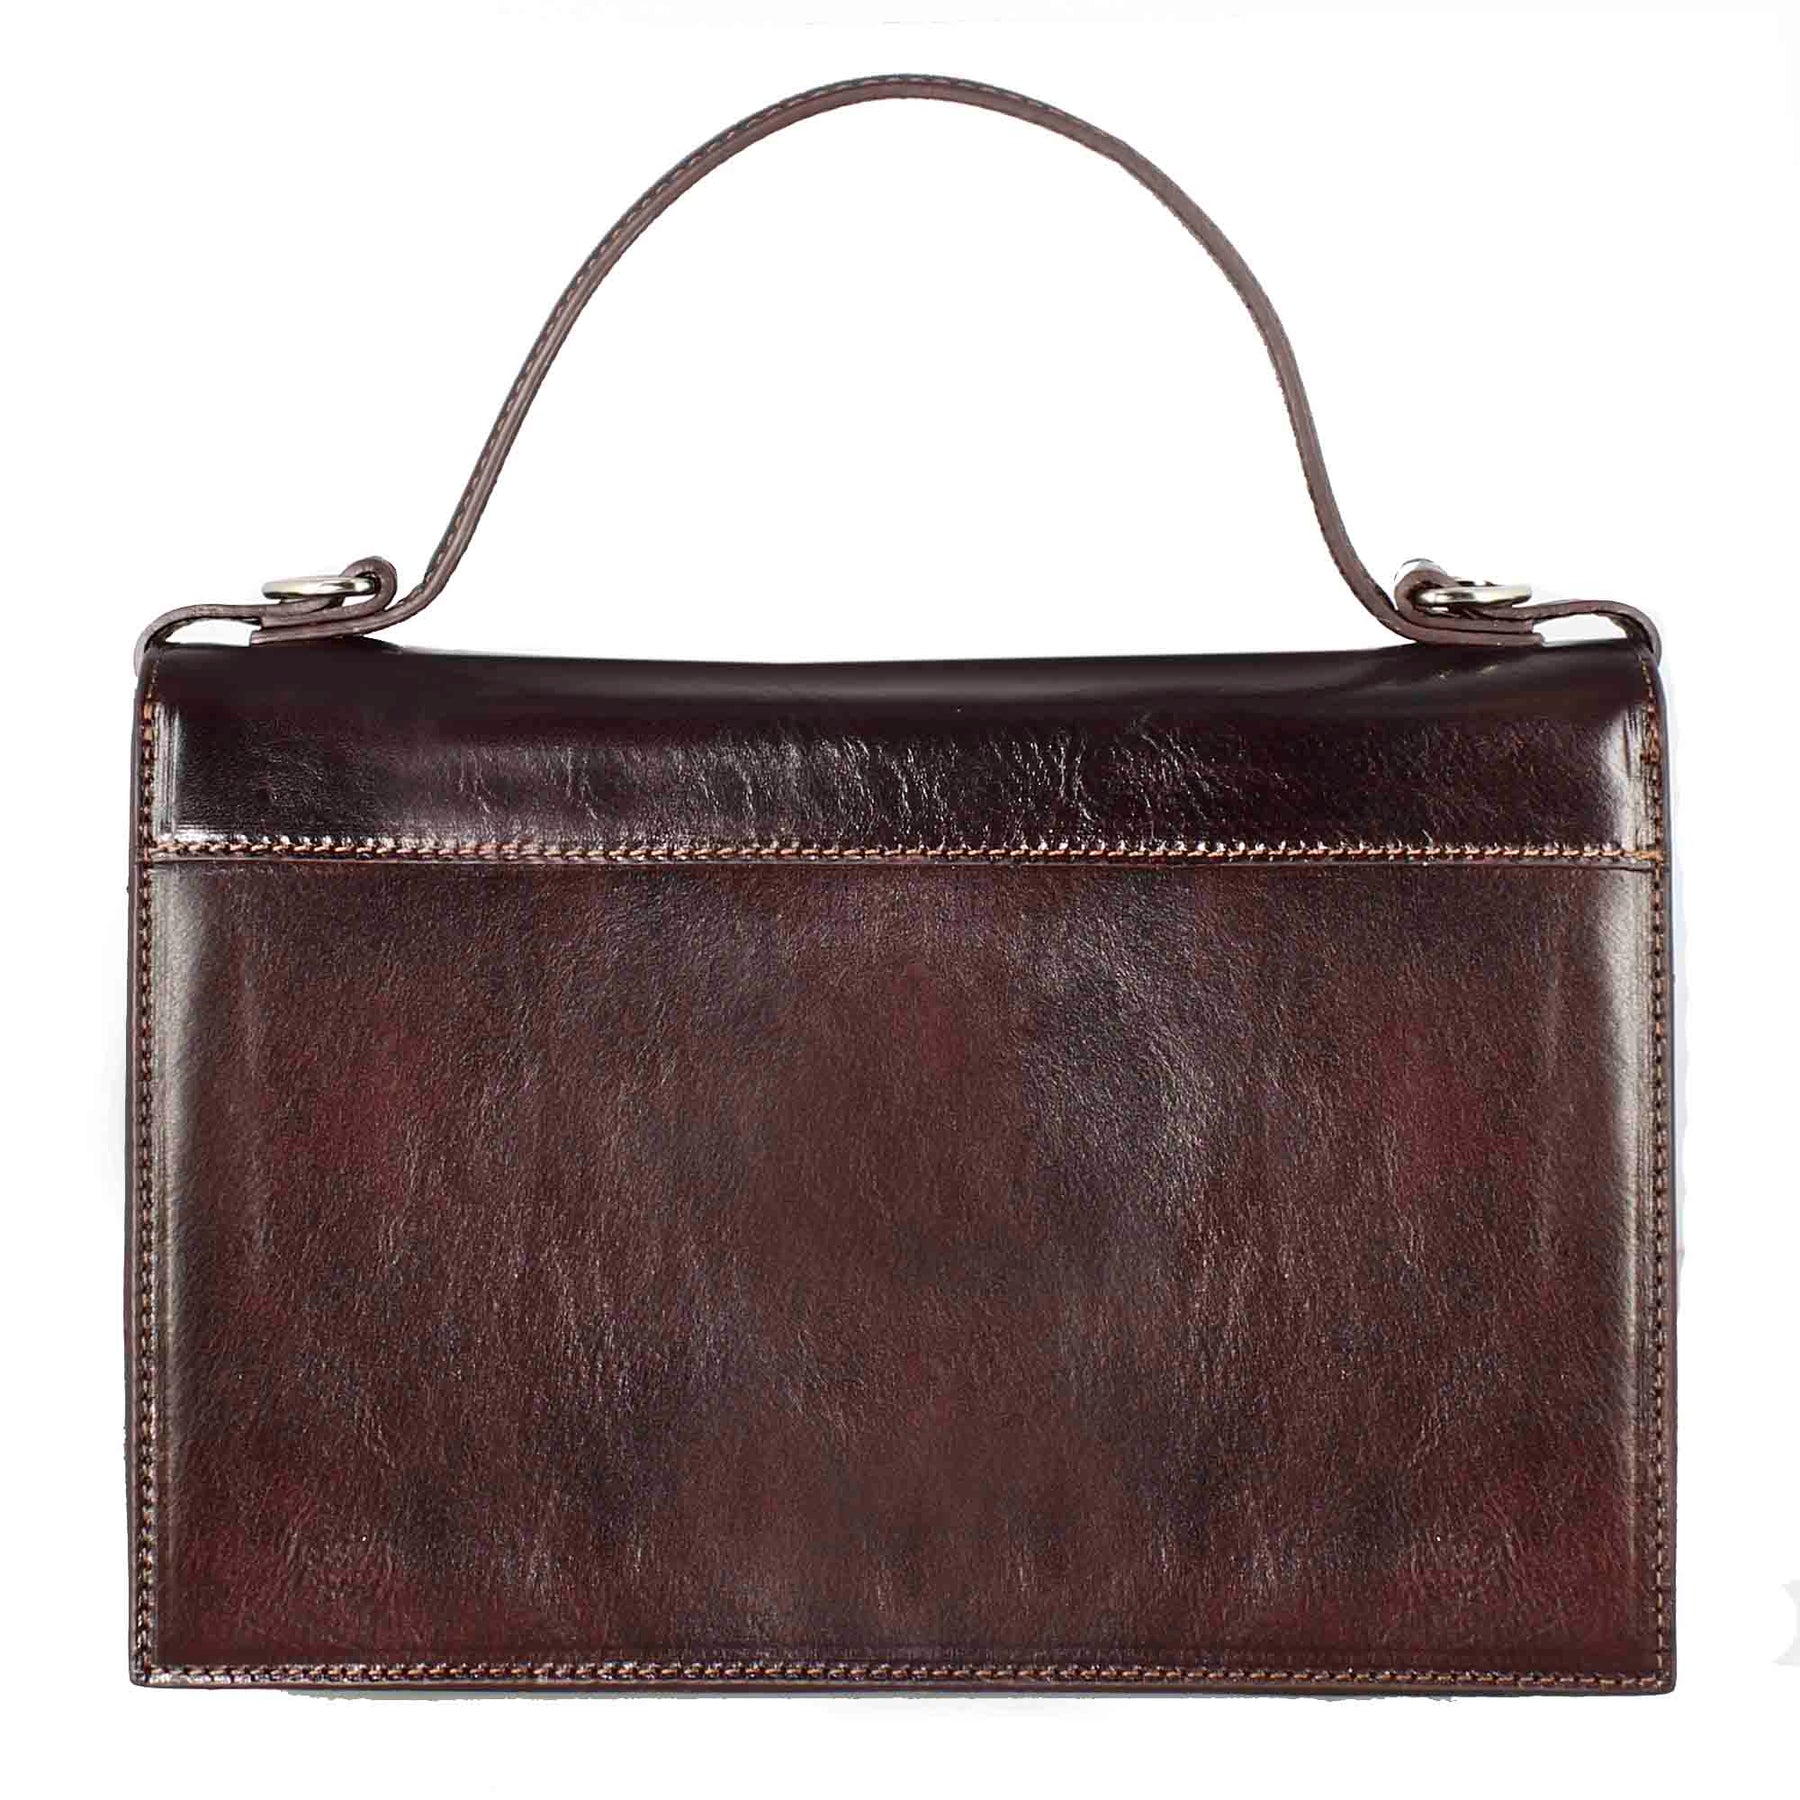 Classic women's Contessina bag in smooth brown leather